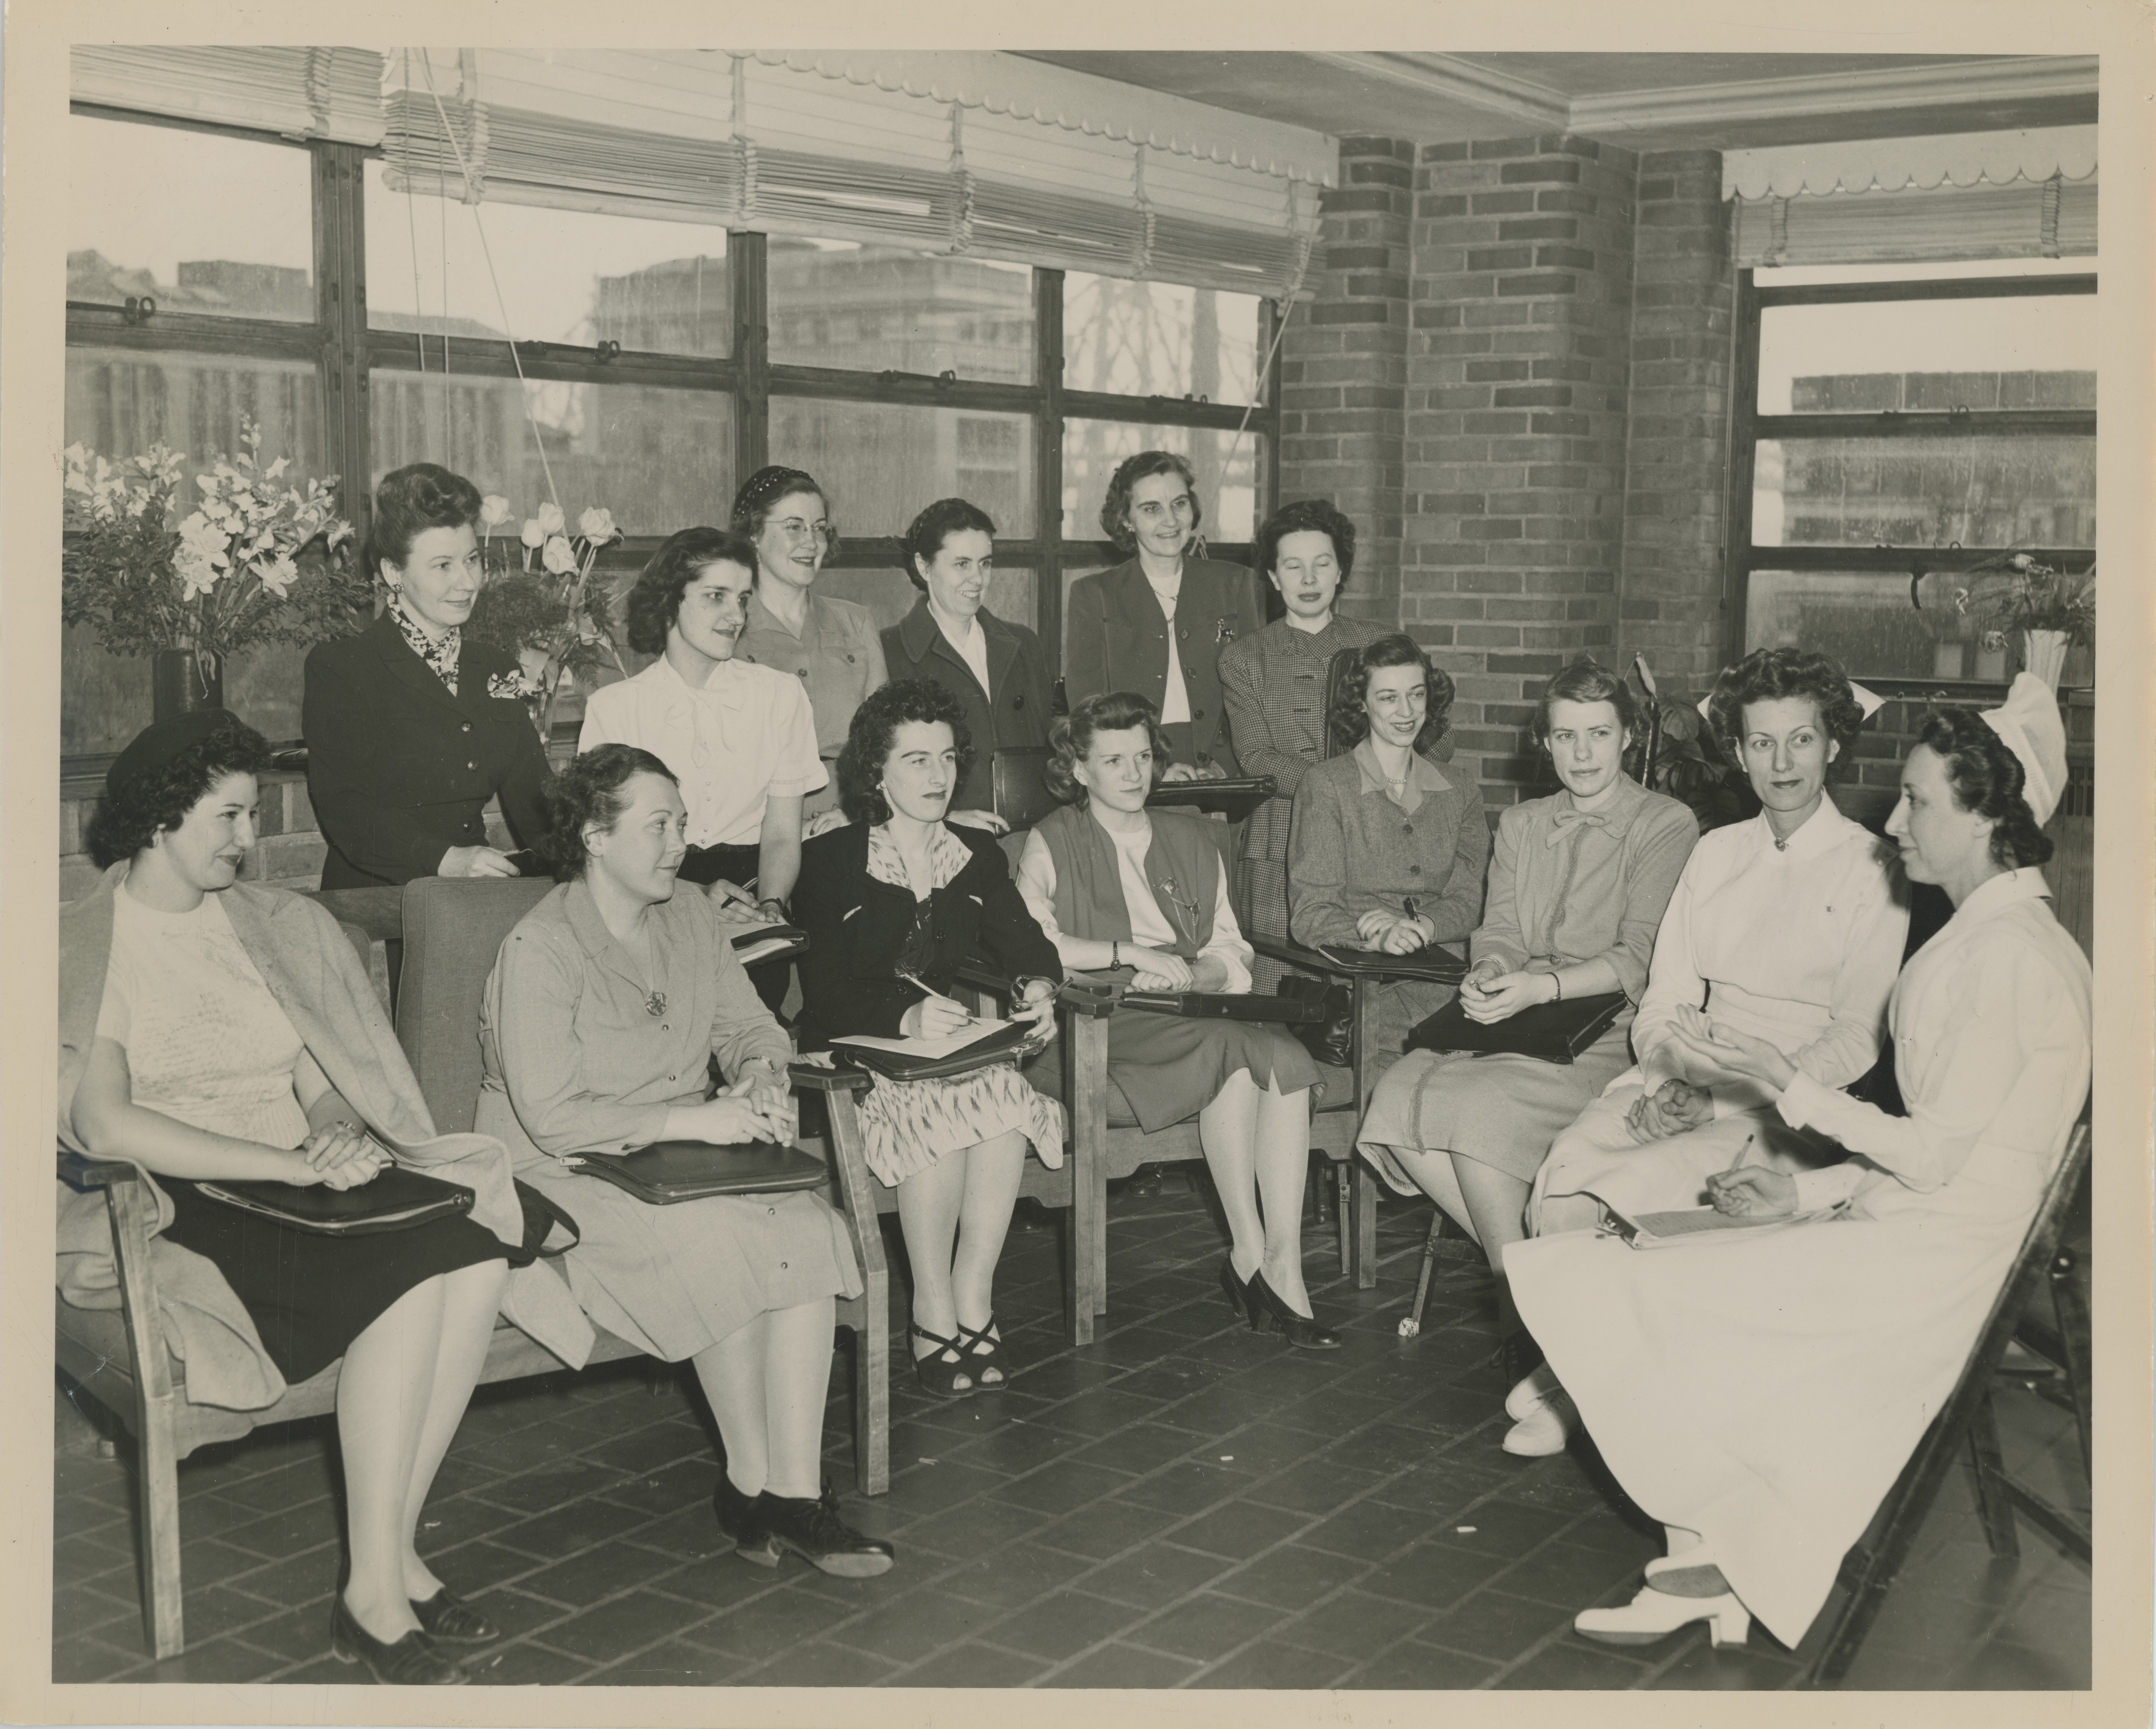 Black and white aged image of crowded room with women sitting in chairs